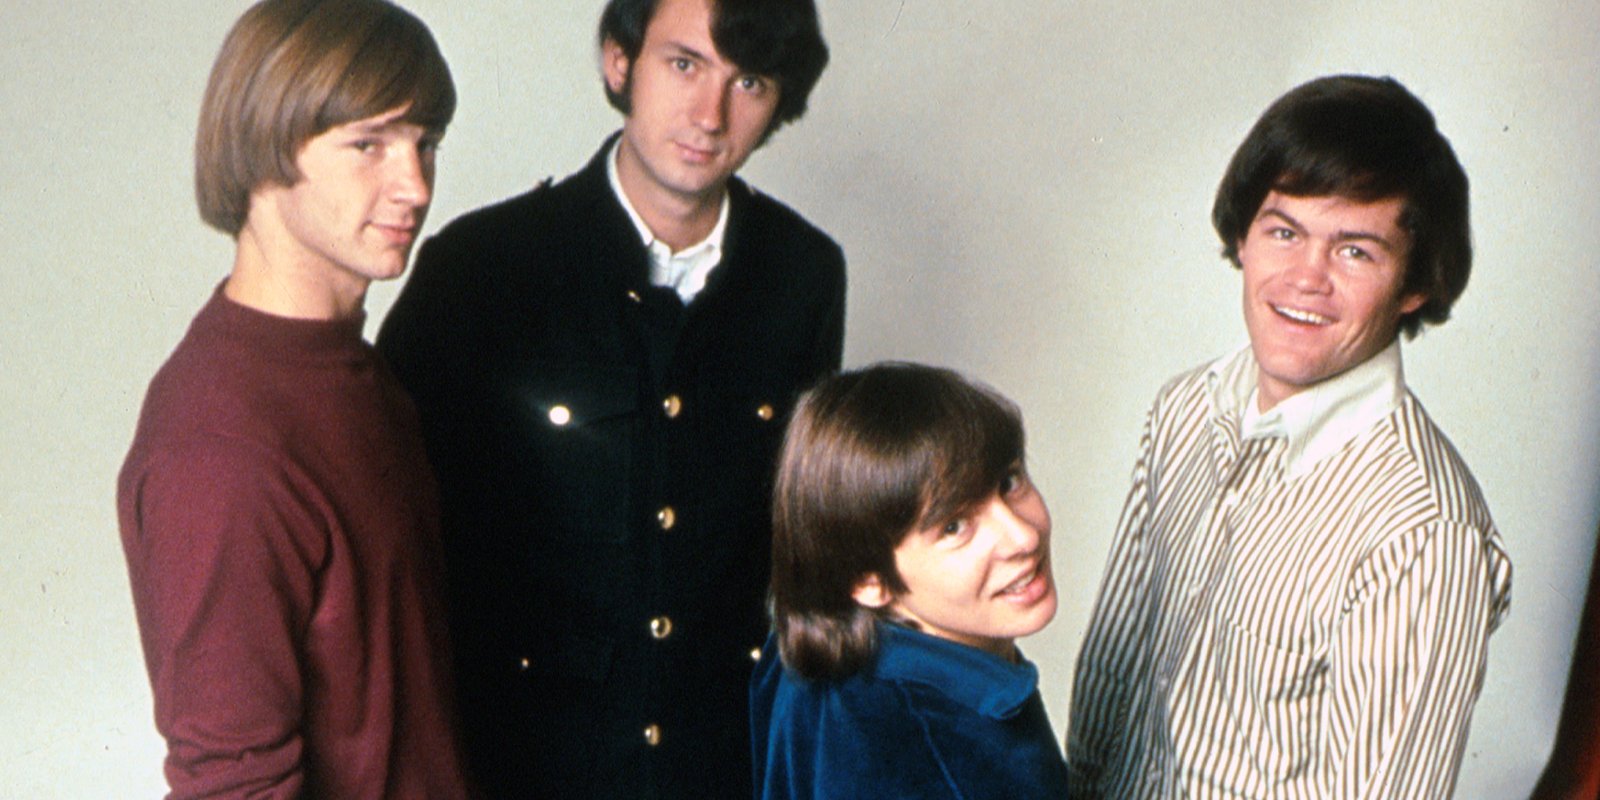 Peter Tork, Mike Nesmith, Davy Jones and Micky Dolenz at a photo shoot.